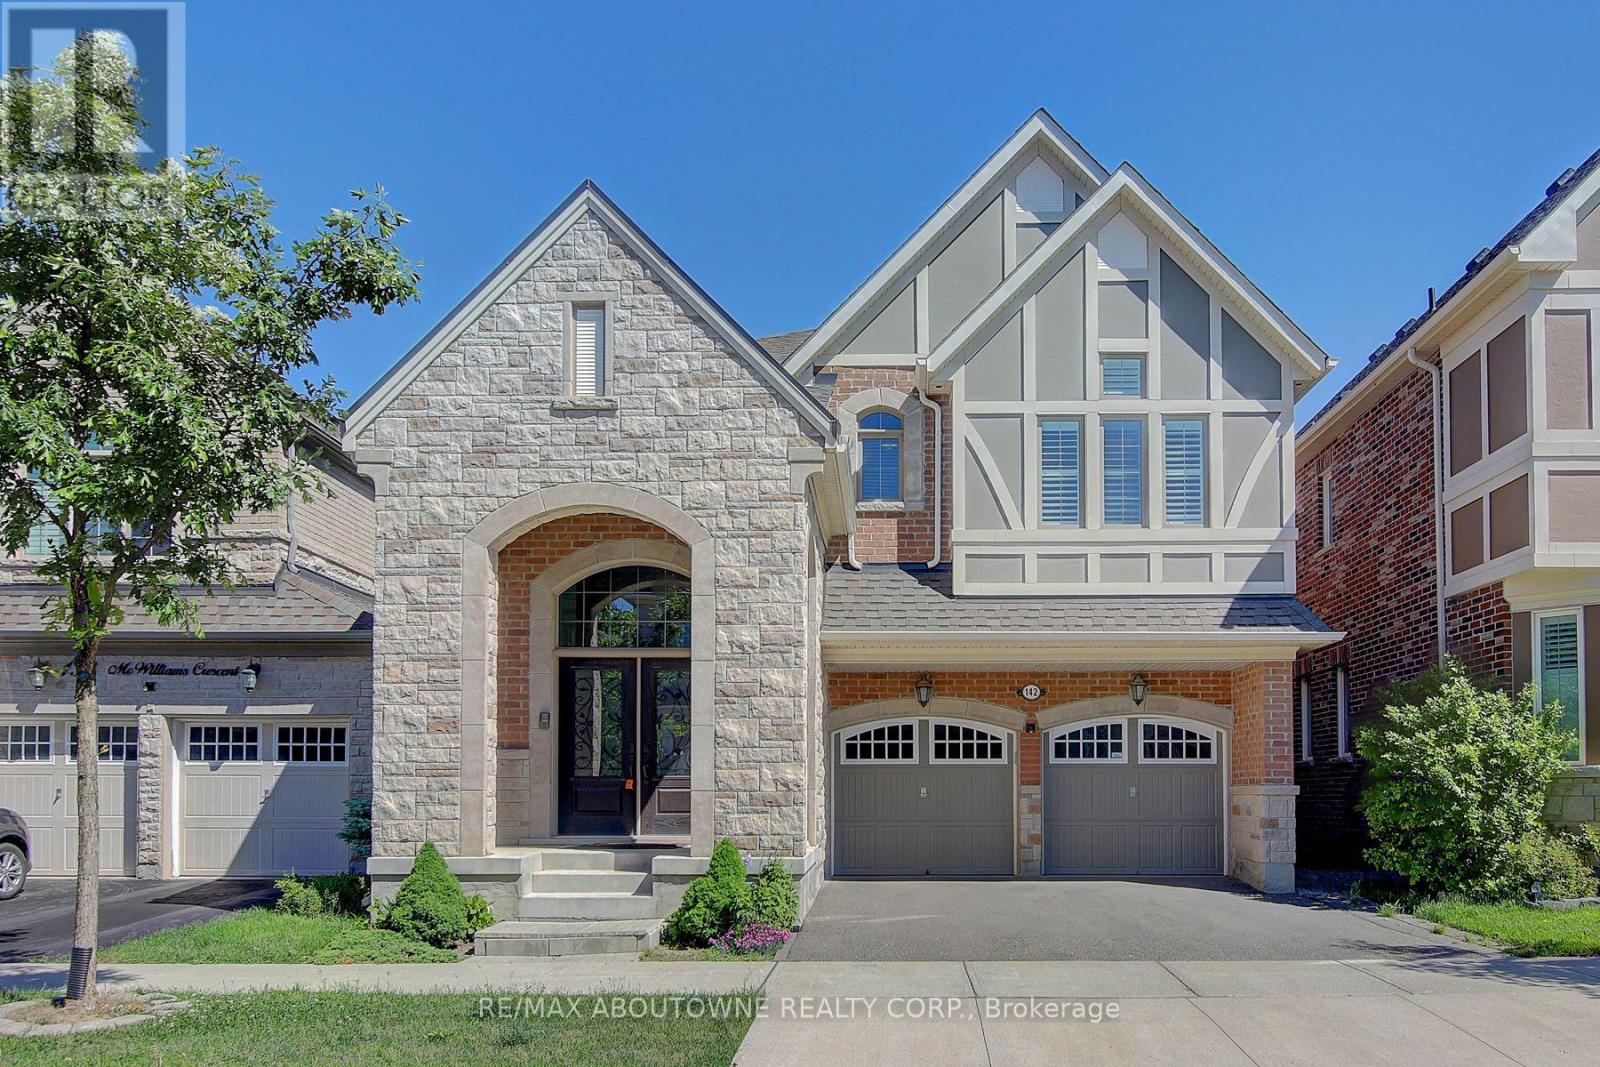 142 Mcwilliams Crescent, Oakville, 4 Bedrooms Bedrooms, ,3 BathroomsBathrooms,Single Family,For Rent,Mcwilliams,W7388384